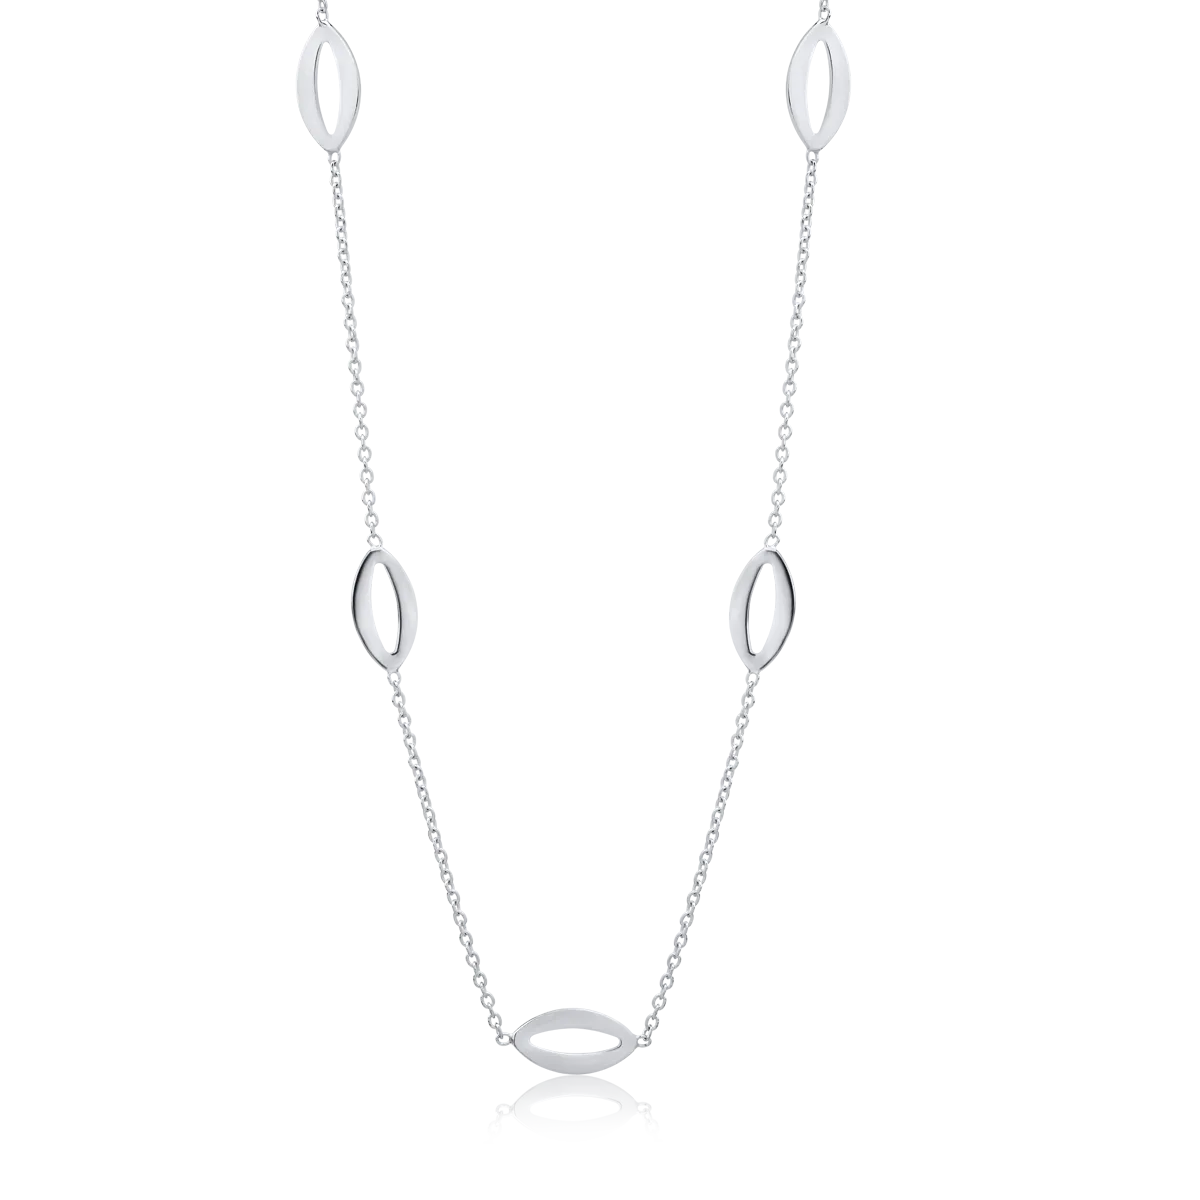 14K white gold necklace